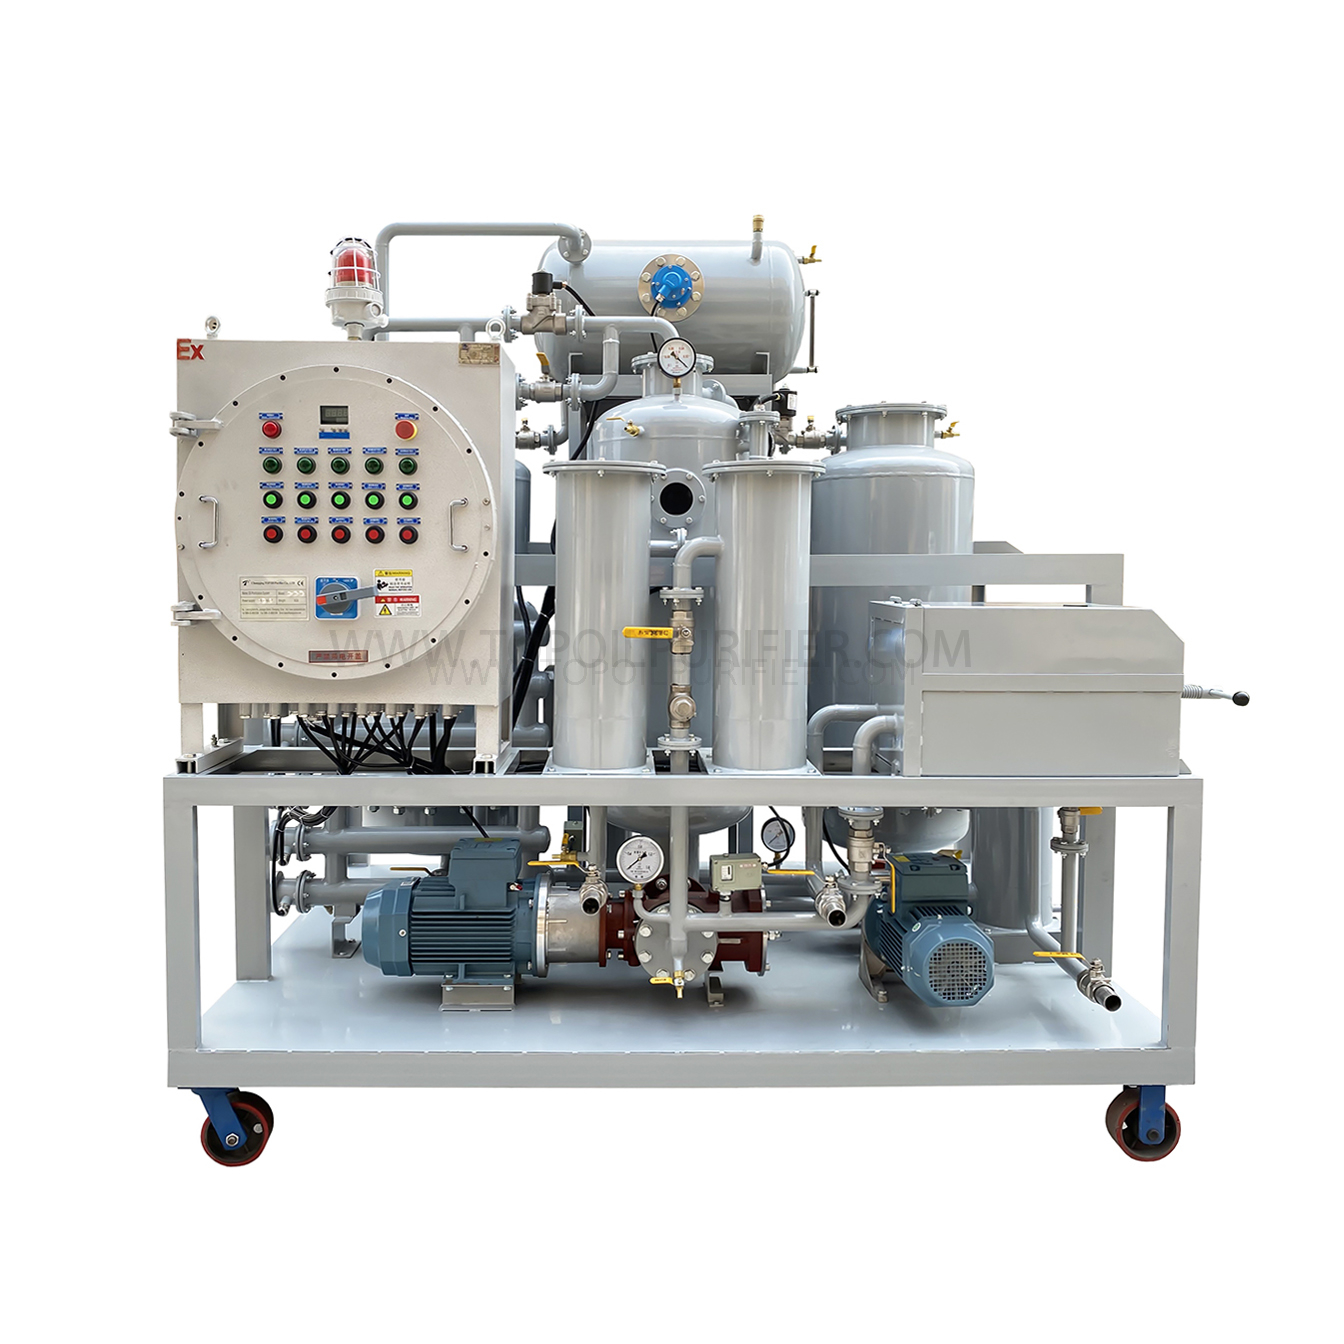 TYR-Ex Diesel Fuel Oil Purification at Discolorization Machine